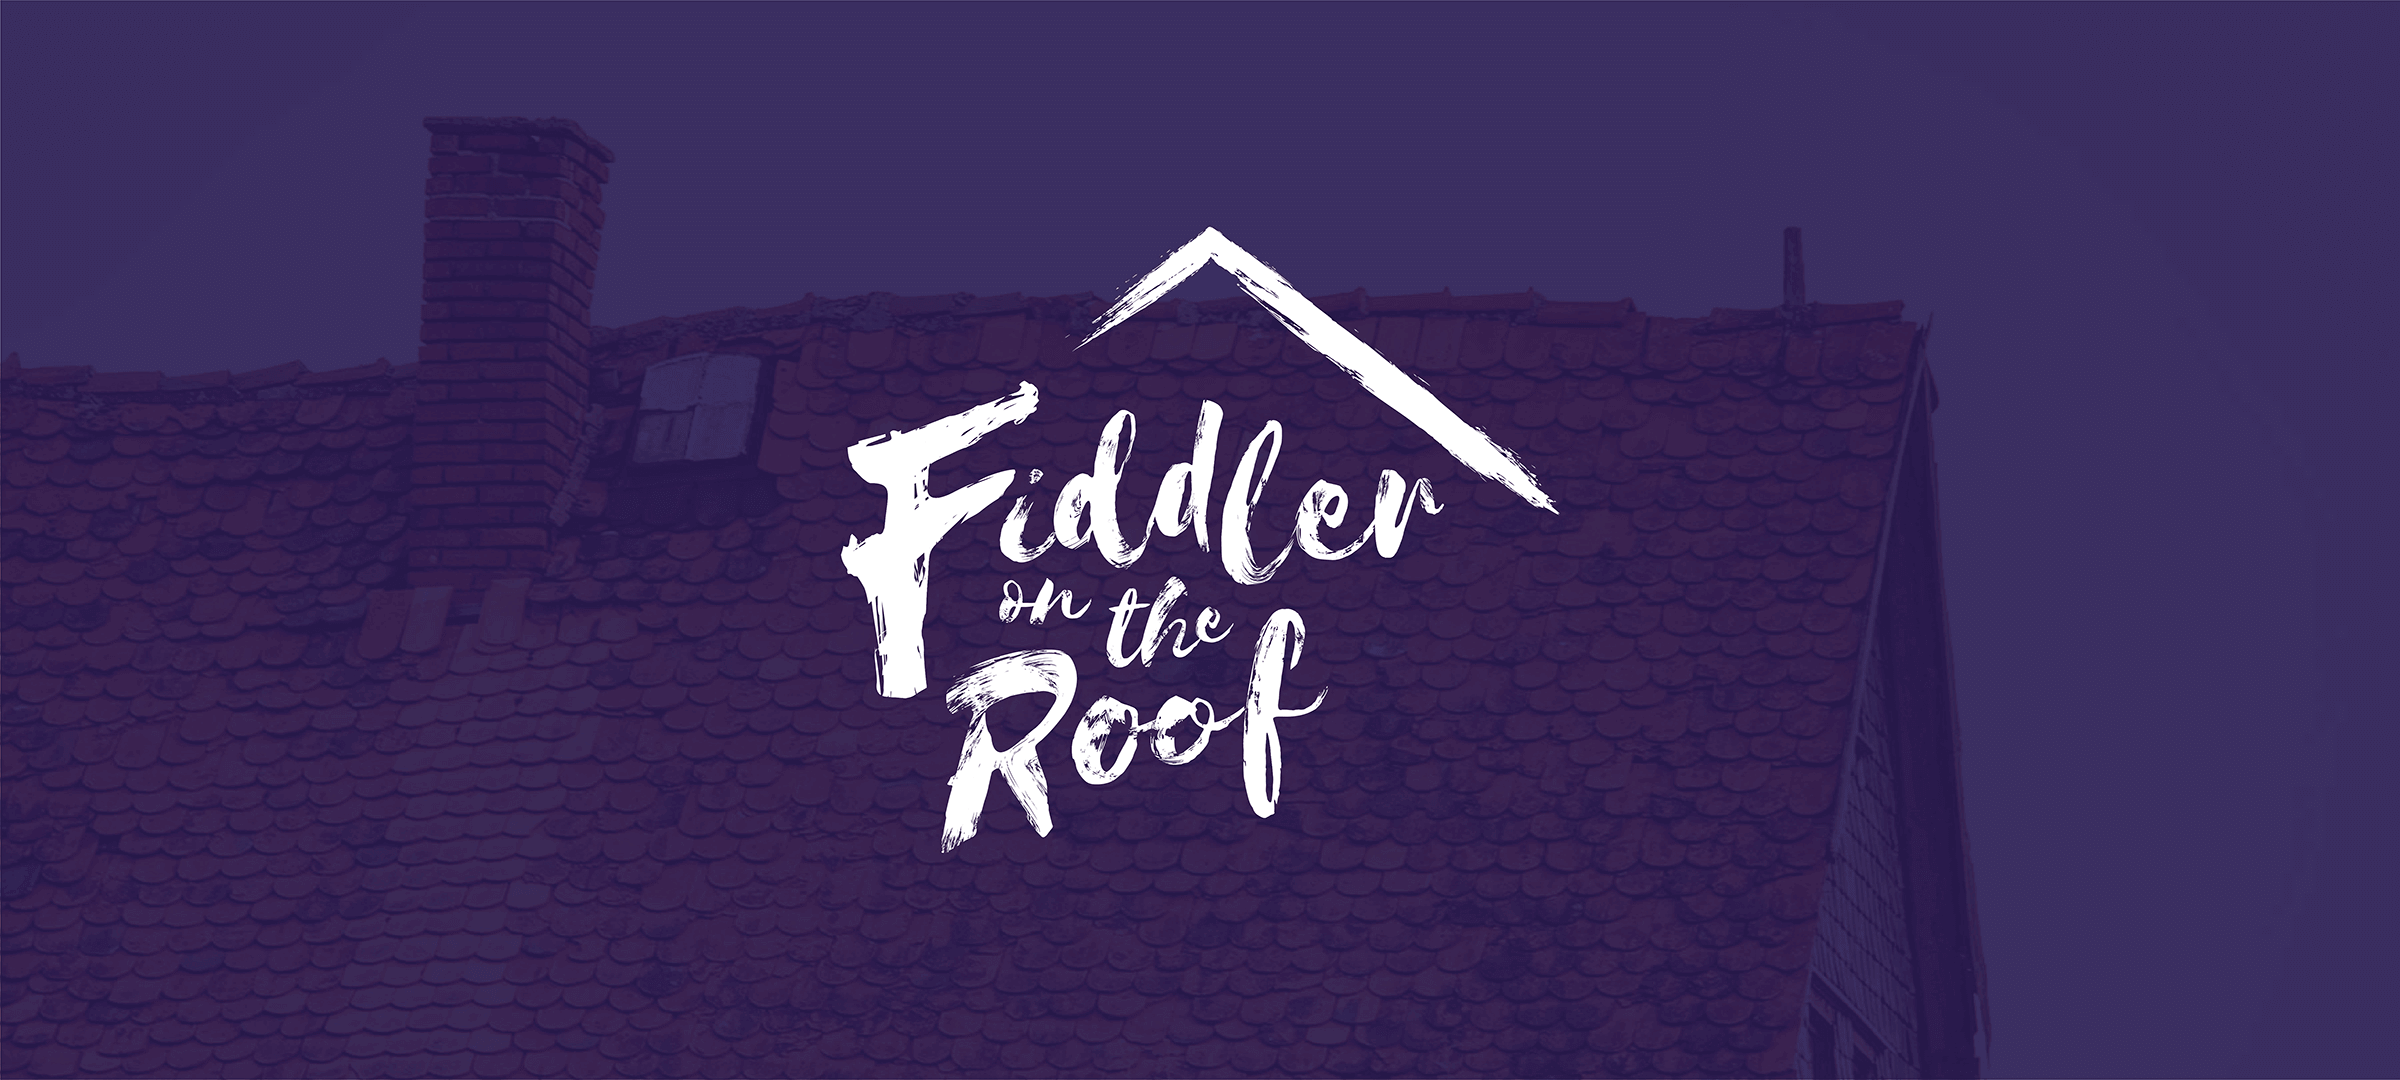 Brand identity design for Gateway Performing Arts' theatre production of Fiddler on the Roof